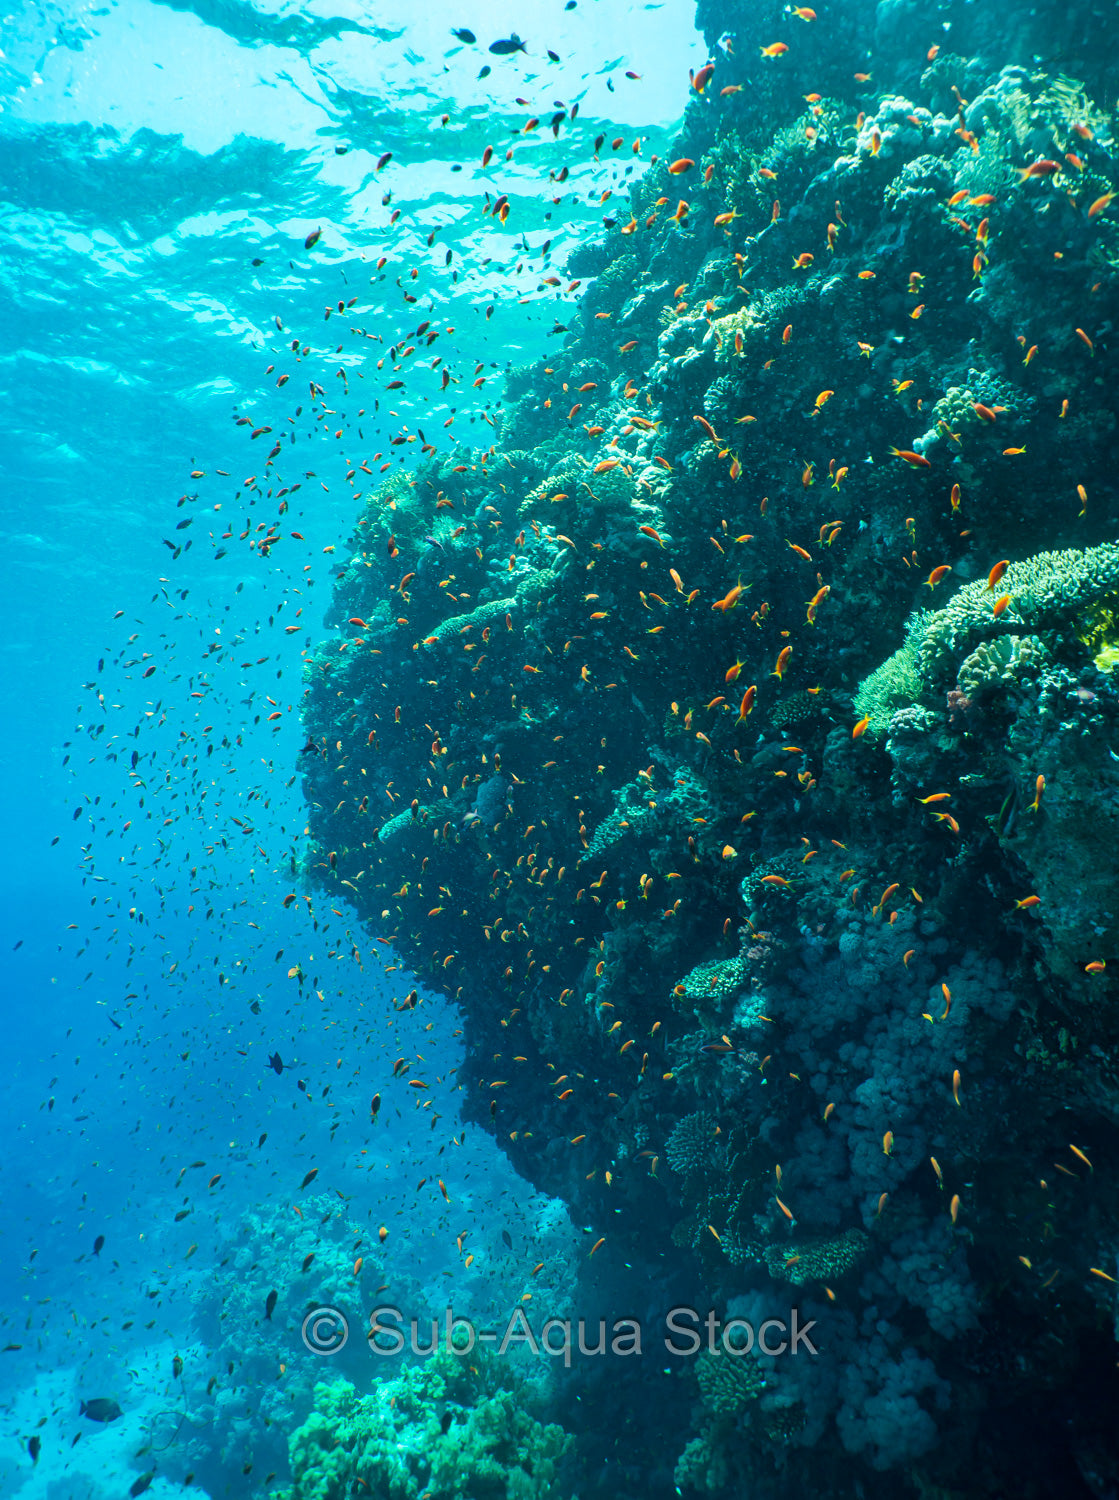 A coral outcrop with shoaling anthias fish at Ras Mohamed National Park.